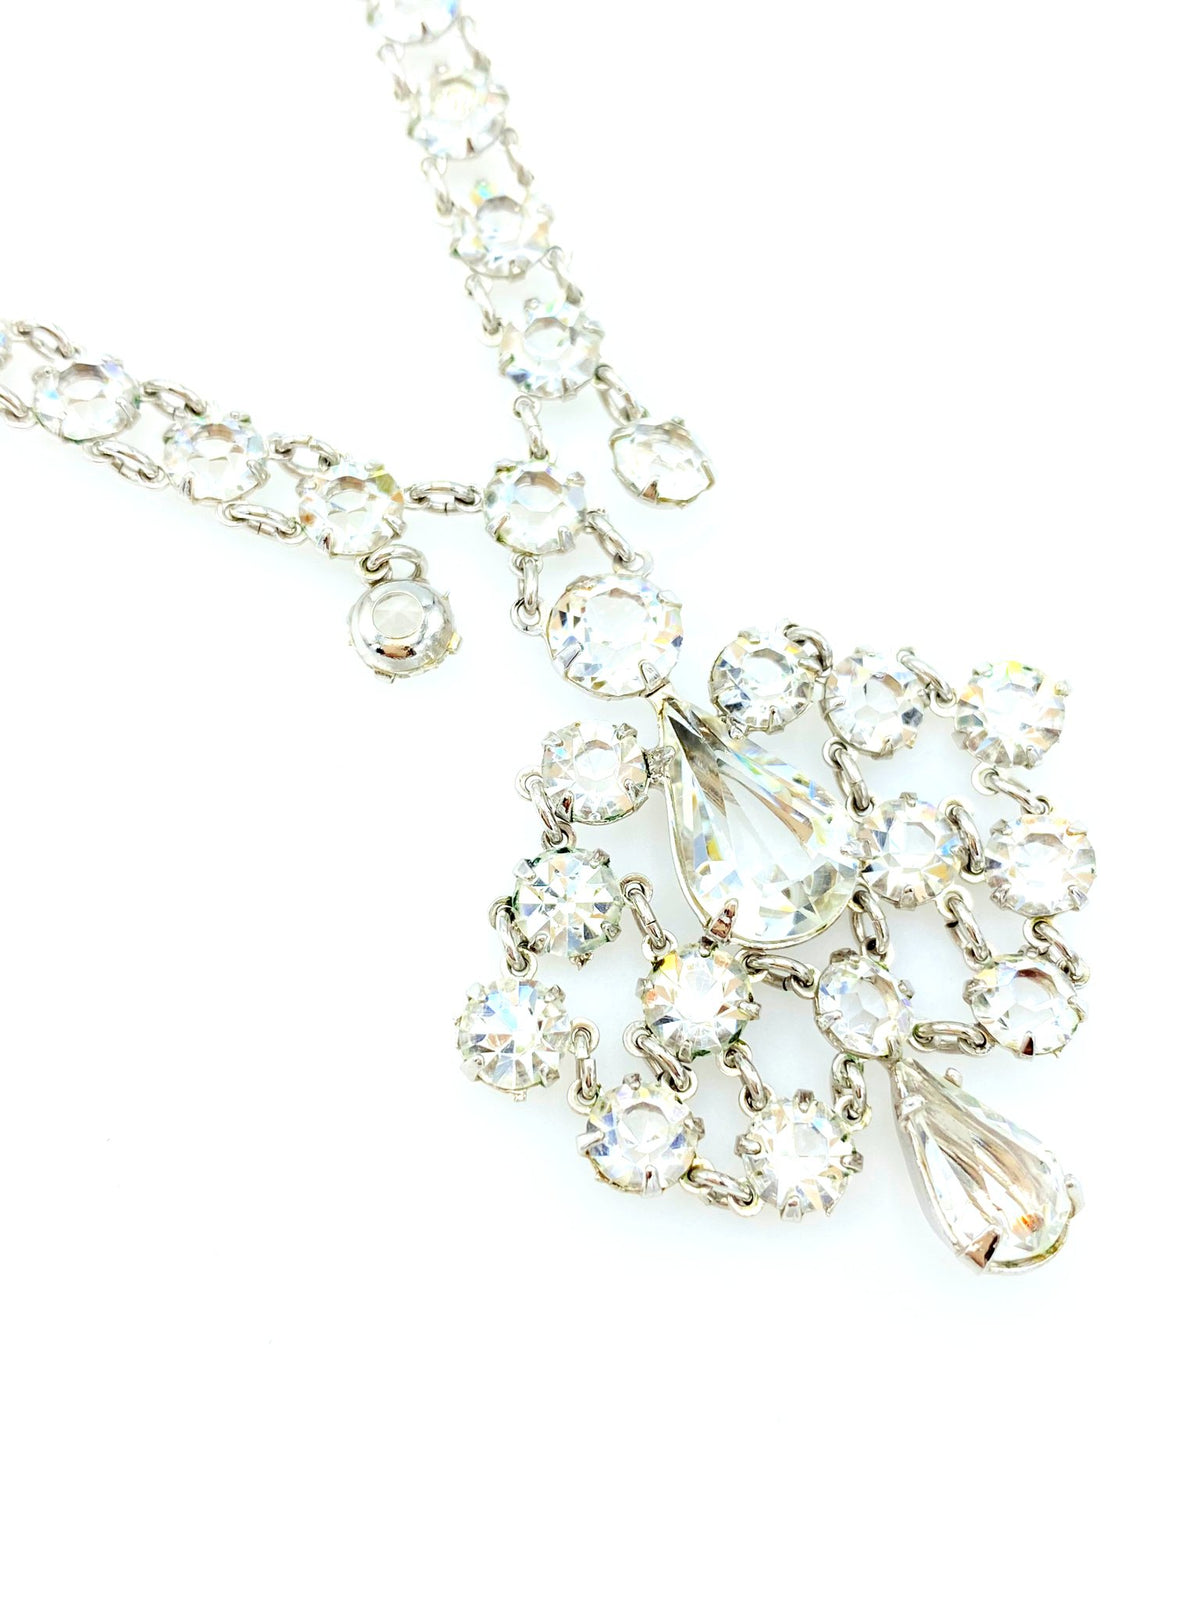 Art Deco White Gold Filled Crystal Statement Bridal Vintage Necklace - 24 Wishes Vintage Jewelry